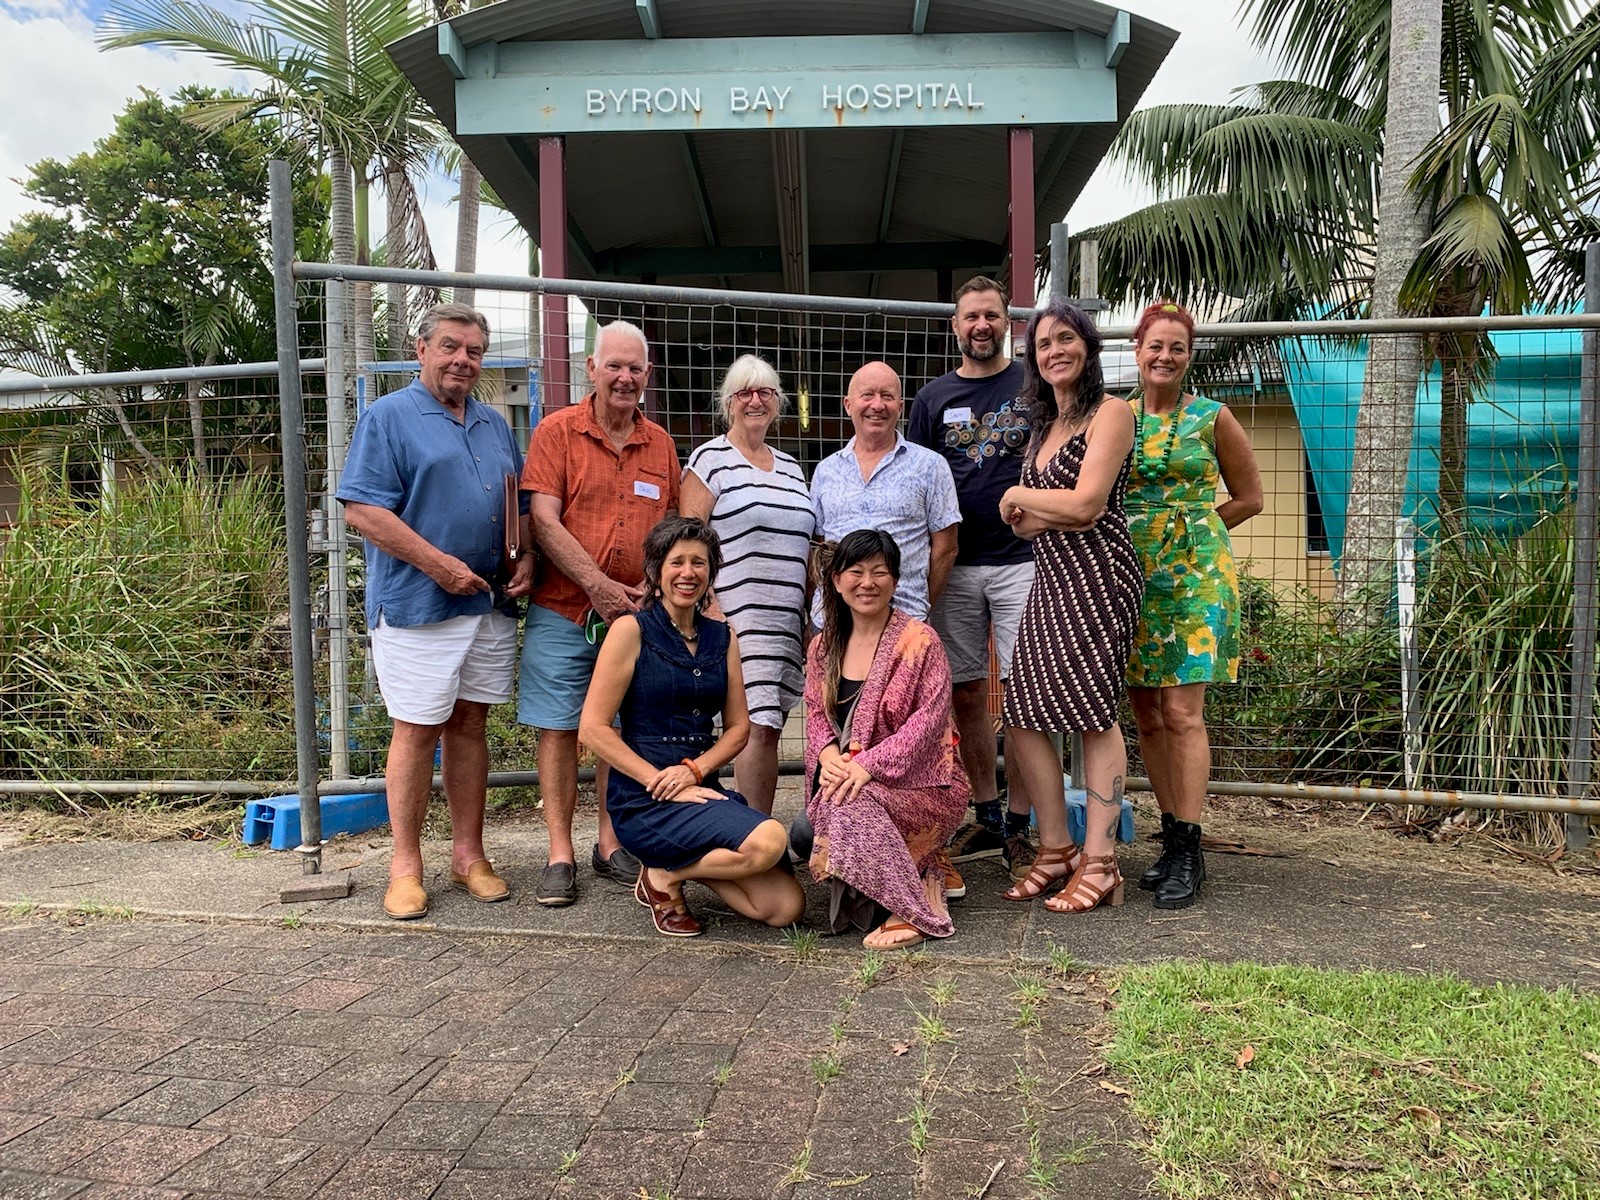 New Byron Bay community hub group meets for the first time